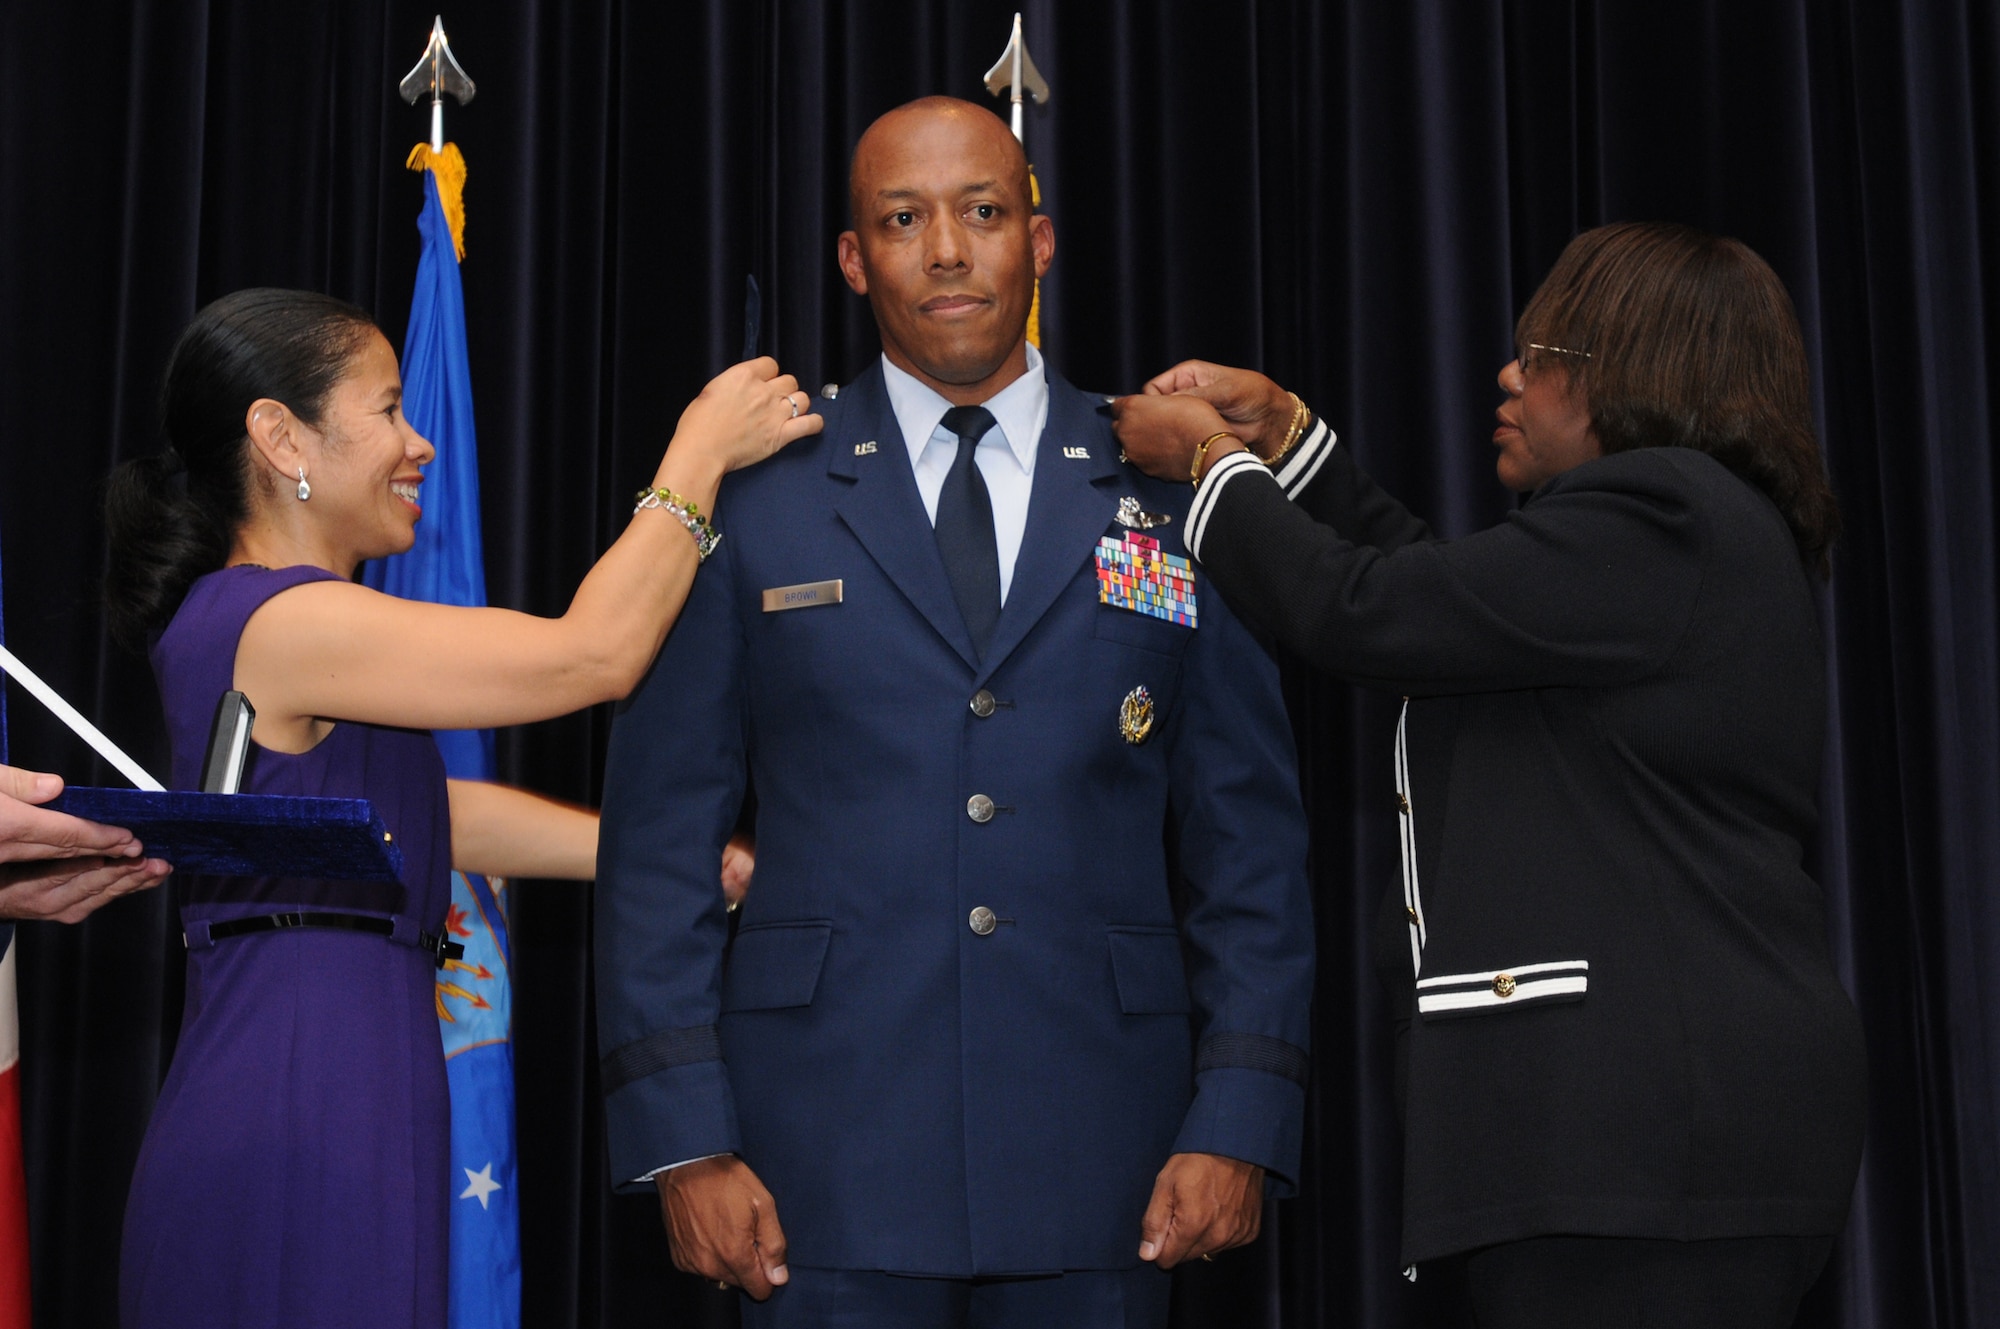 Brig. Gen. Charles Q. Brown Jr., 31st Fighter Wing commander's wife (left) and mother (right) pin on his first star following the orders being published for his promotion Sept. 18, 2009, at Aviano Air Base, Italy.  Lt. Gen. Frank Gorenc, 3rd Air Force commander, Ramstein Air Base, Germany presided over the ceremony.  (U.S. Air Force photo/Staff Sgt. Patrick Dixon) 